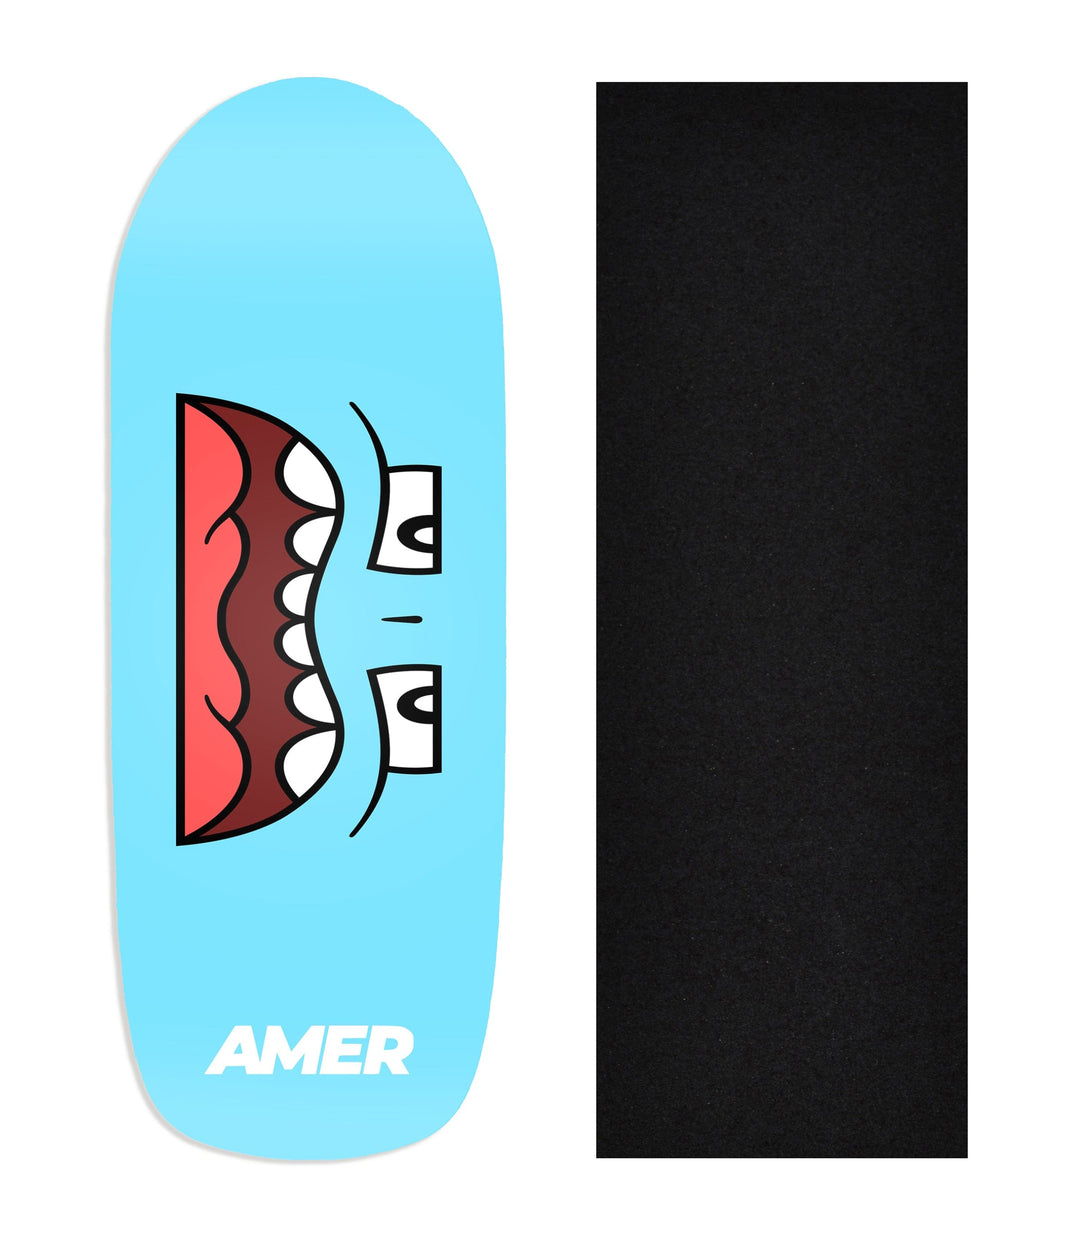 Teak Tuning Heat Transfer Graphic Wooden Fingerboard Deck, Amer - Entry#52 Poolparty Deck